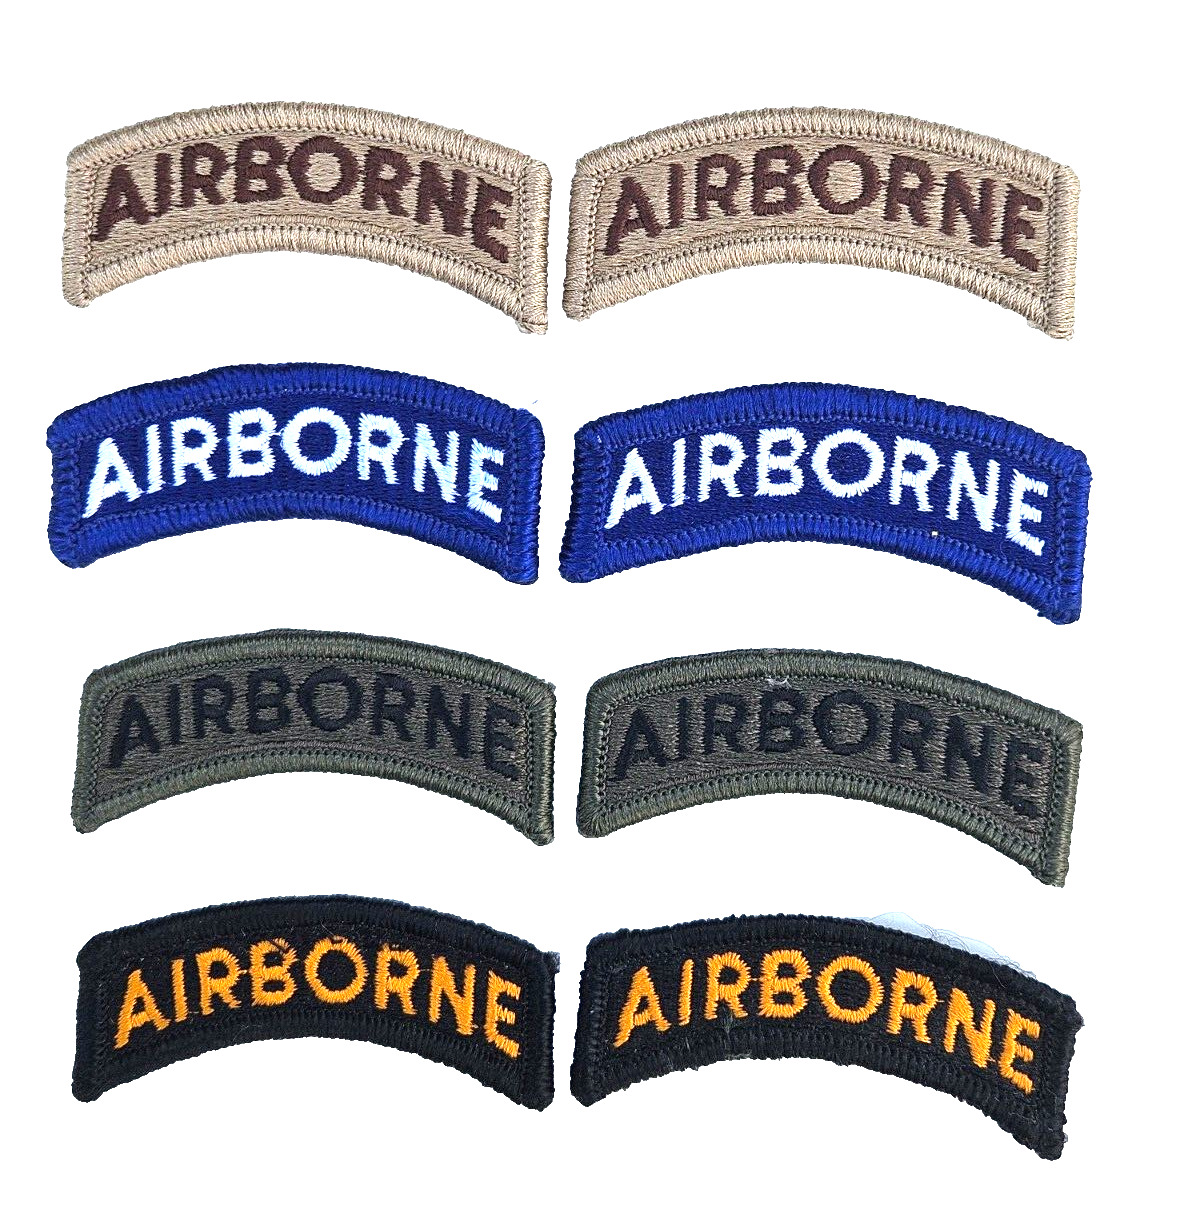 Collectors 8 Pack U.S. Army Airborne Shoulder Scroll TAB Patches